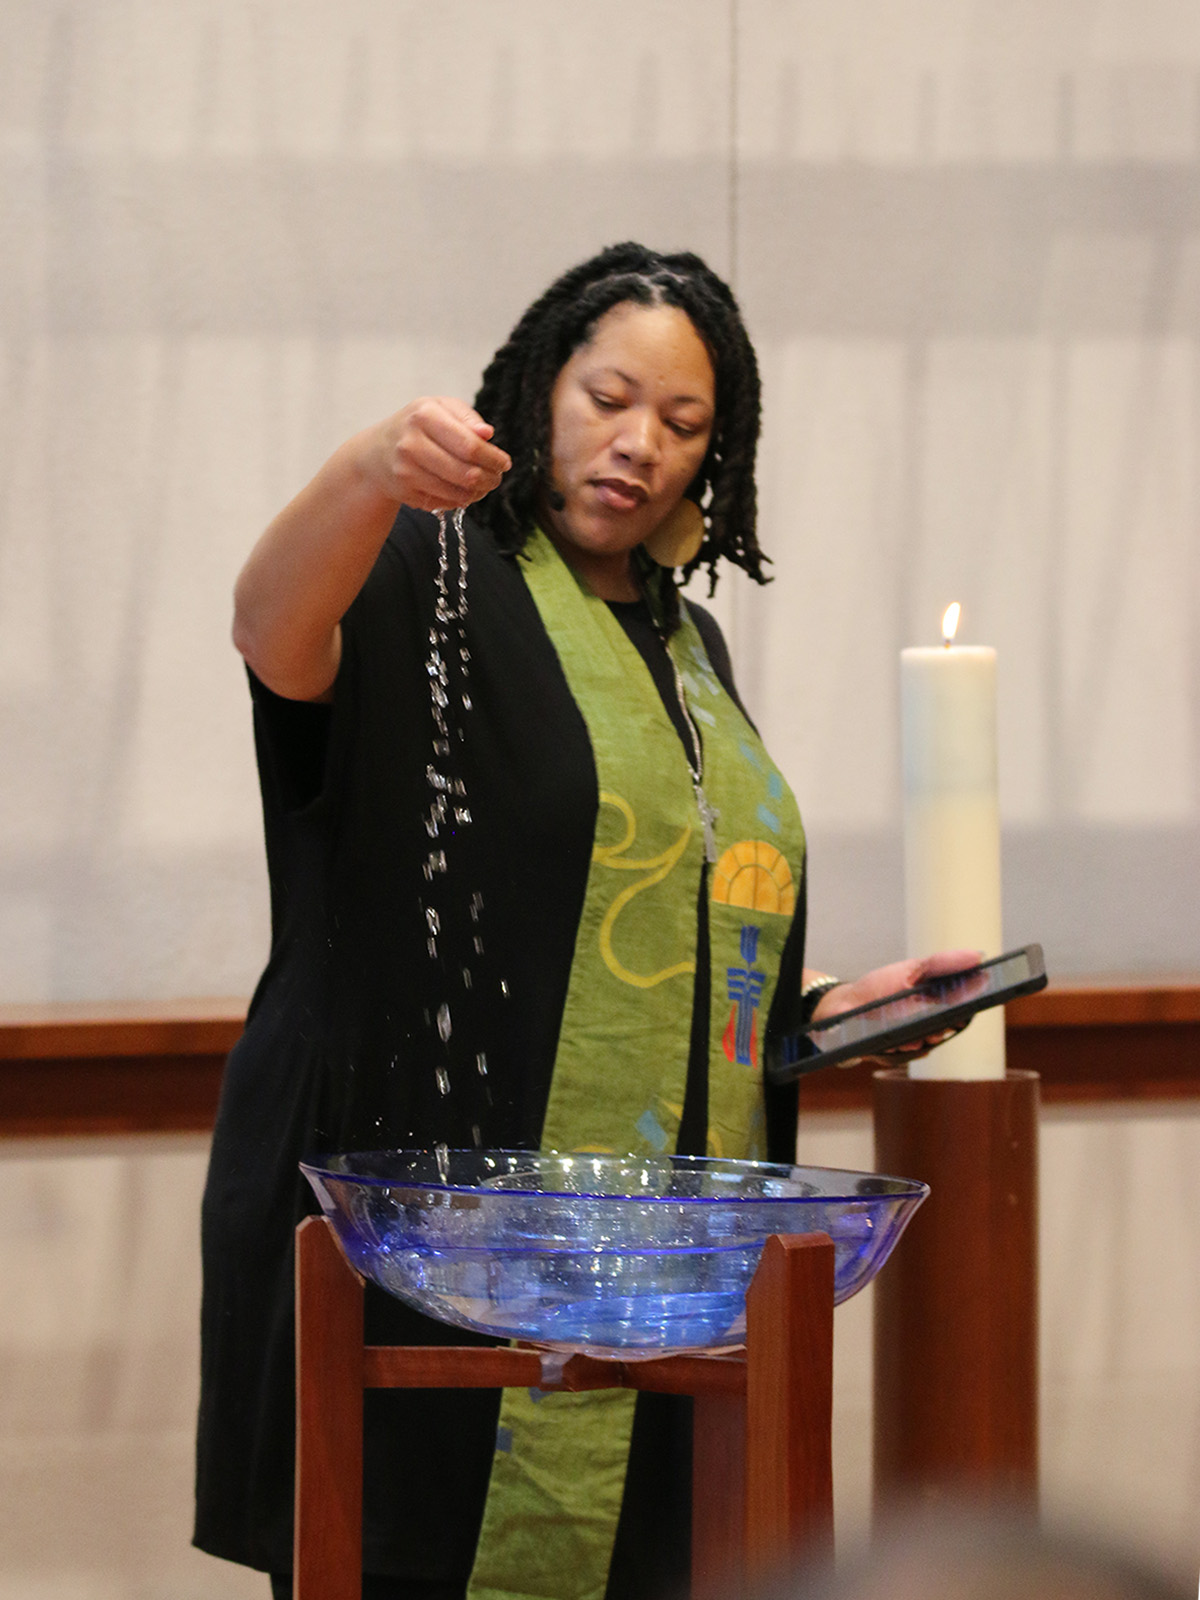 Rev. Shavon Starling-Louis, Co-Moderator of the 225th General Assembly preached in chapel on Friday. Photo by Rick Jones.